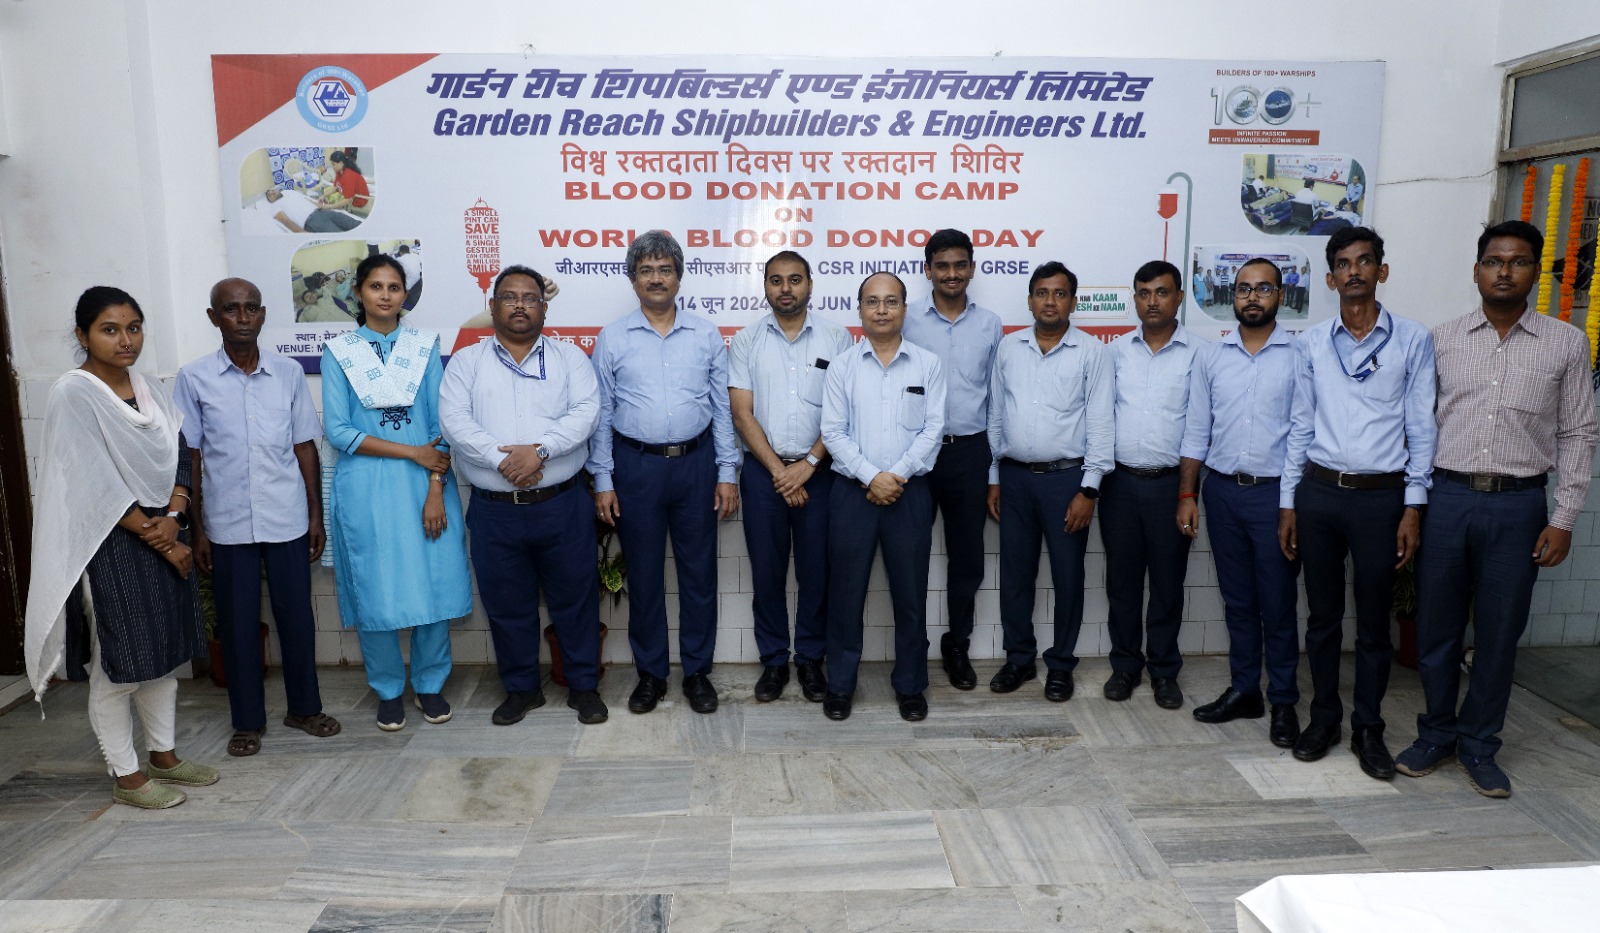 Annual Blood Donation Camp held on World Blood Donor Day on 14 Jun 24 - Thumbnail